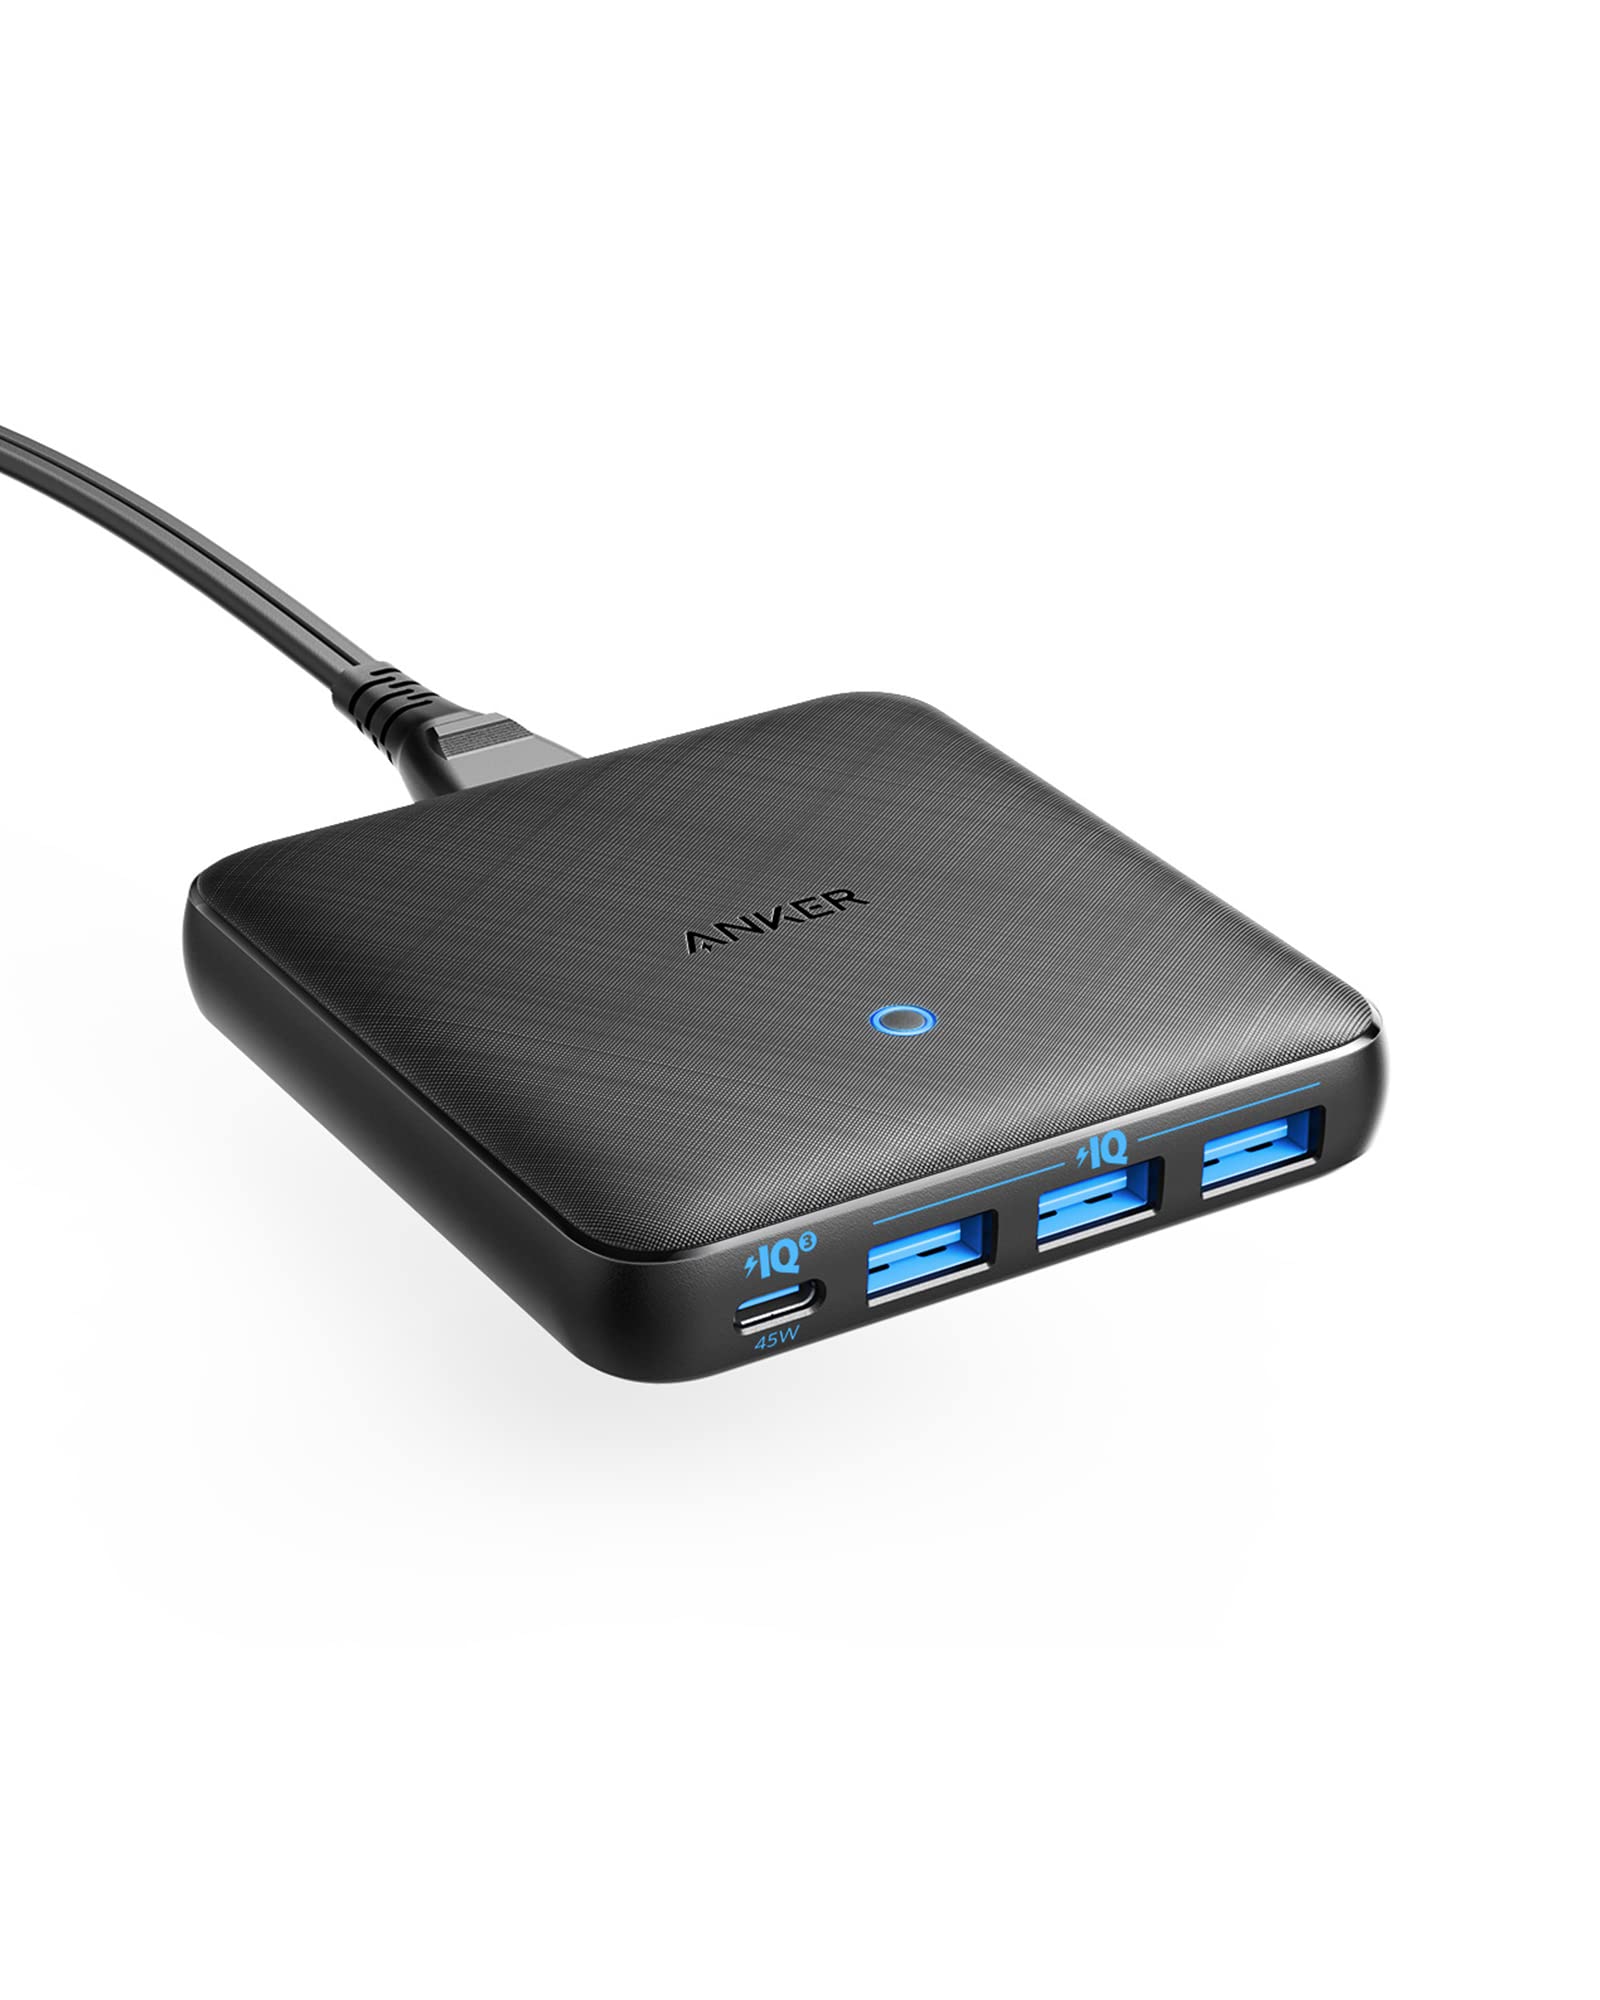 Anker Play Anker 65W 4 Port PIQ 30 & gaN Fast charger Adapter, PowerPort Atom III Slim Wall charger - 45W USB c Port, Ideal for MacBook, La